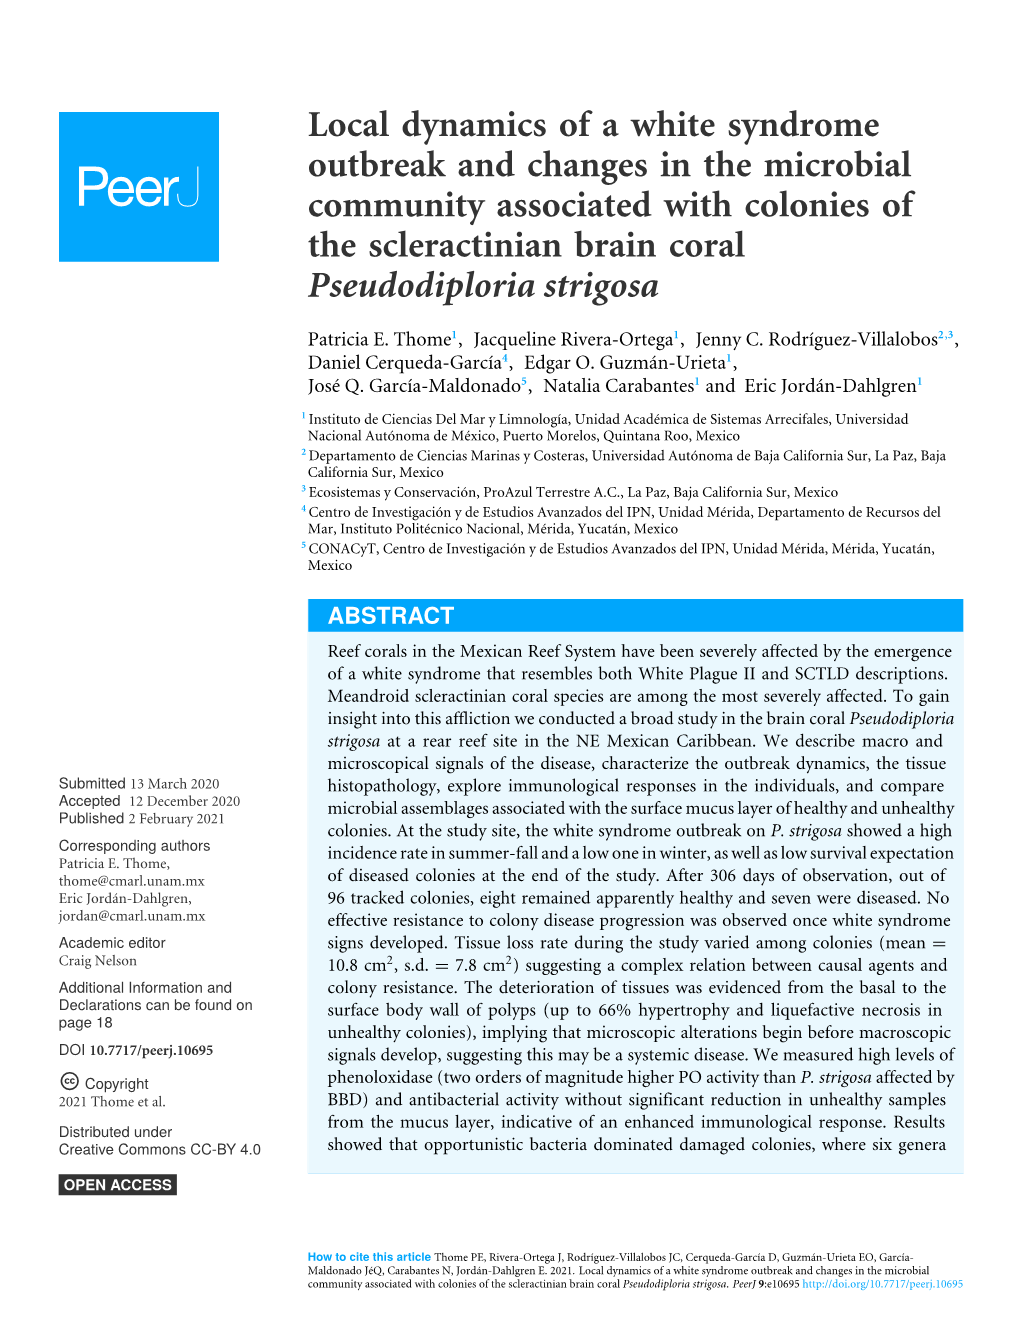 Local Dynamics of a White Syndrome Outbreak and Changes in the Microbial Community Associated with Colonies of the Scleractinian Brain Coral Pseudodiploria Strigosa